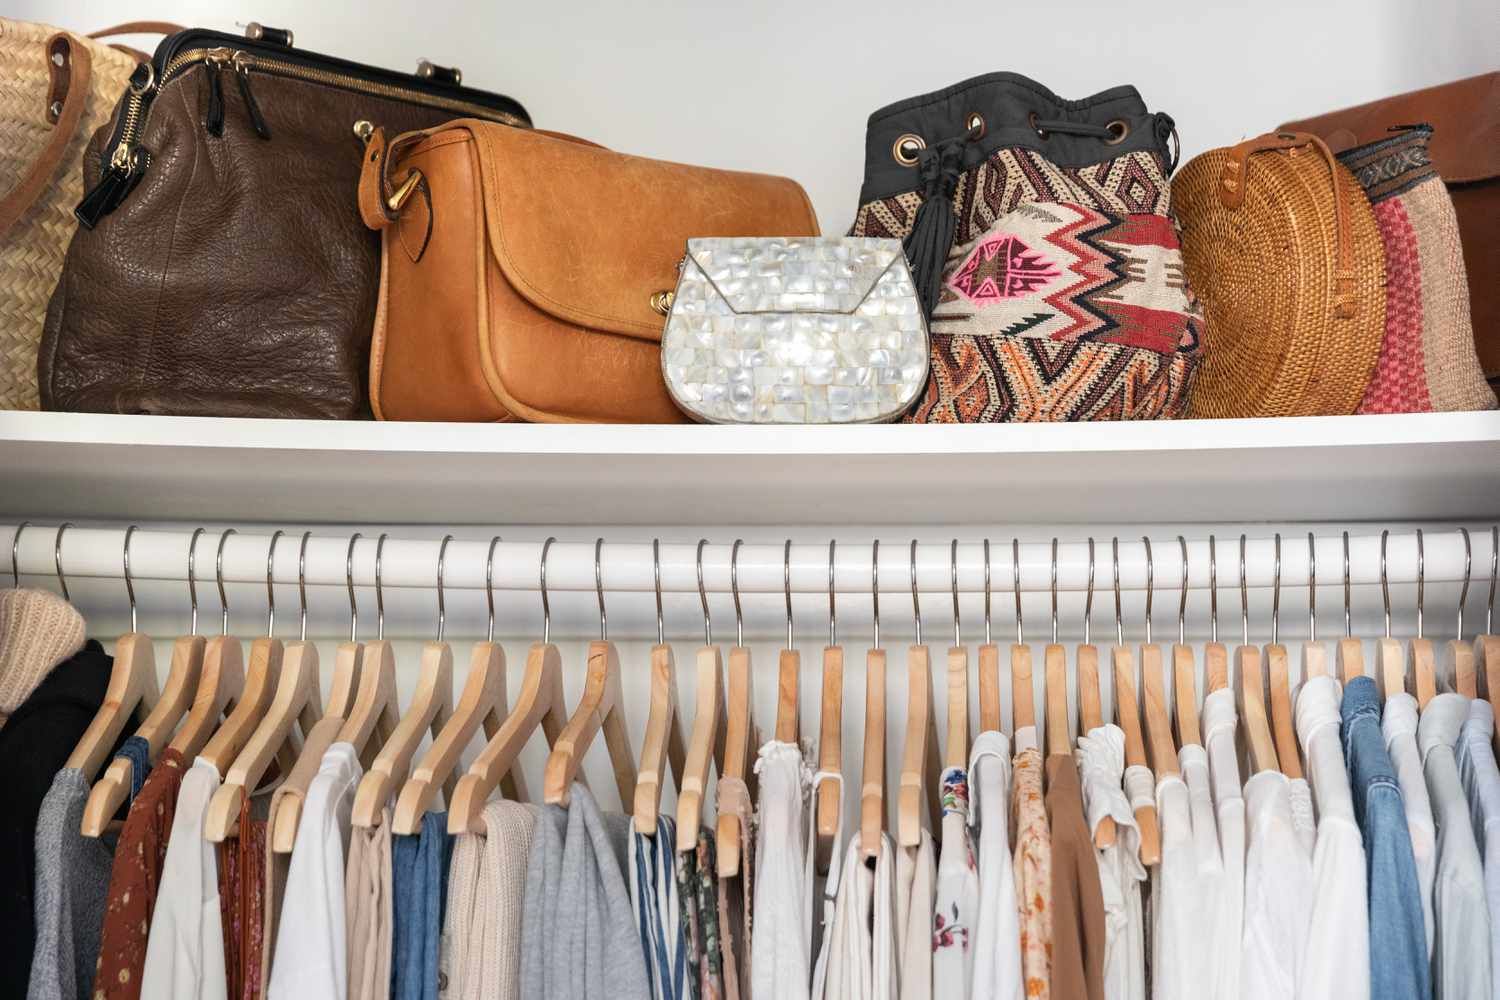 How To Store Handbags In A Small Space